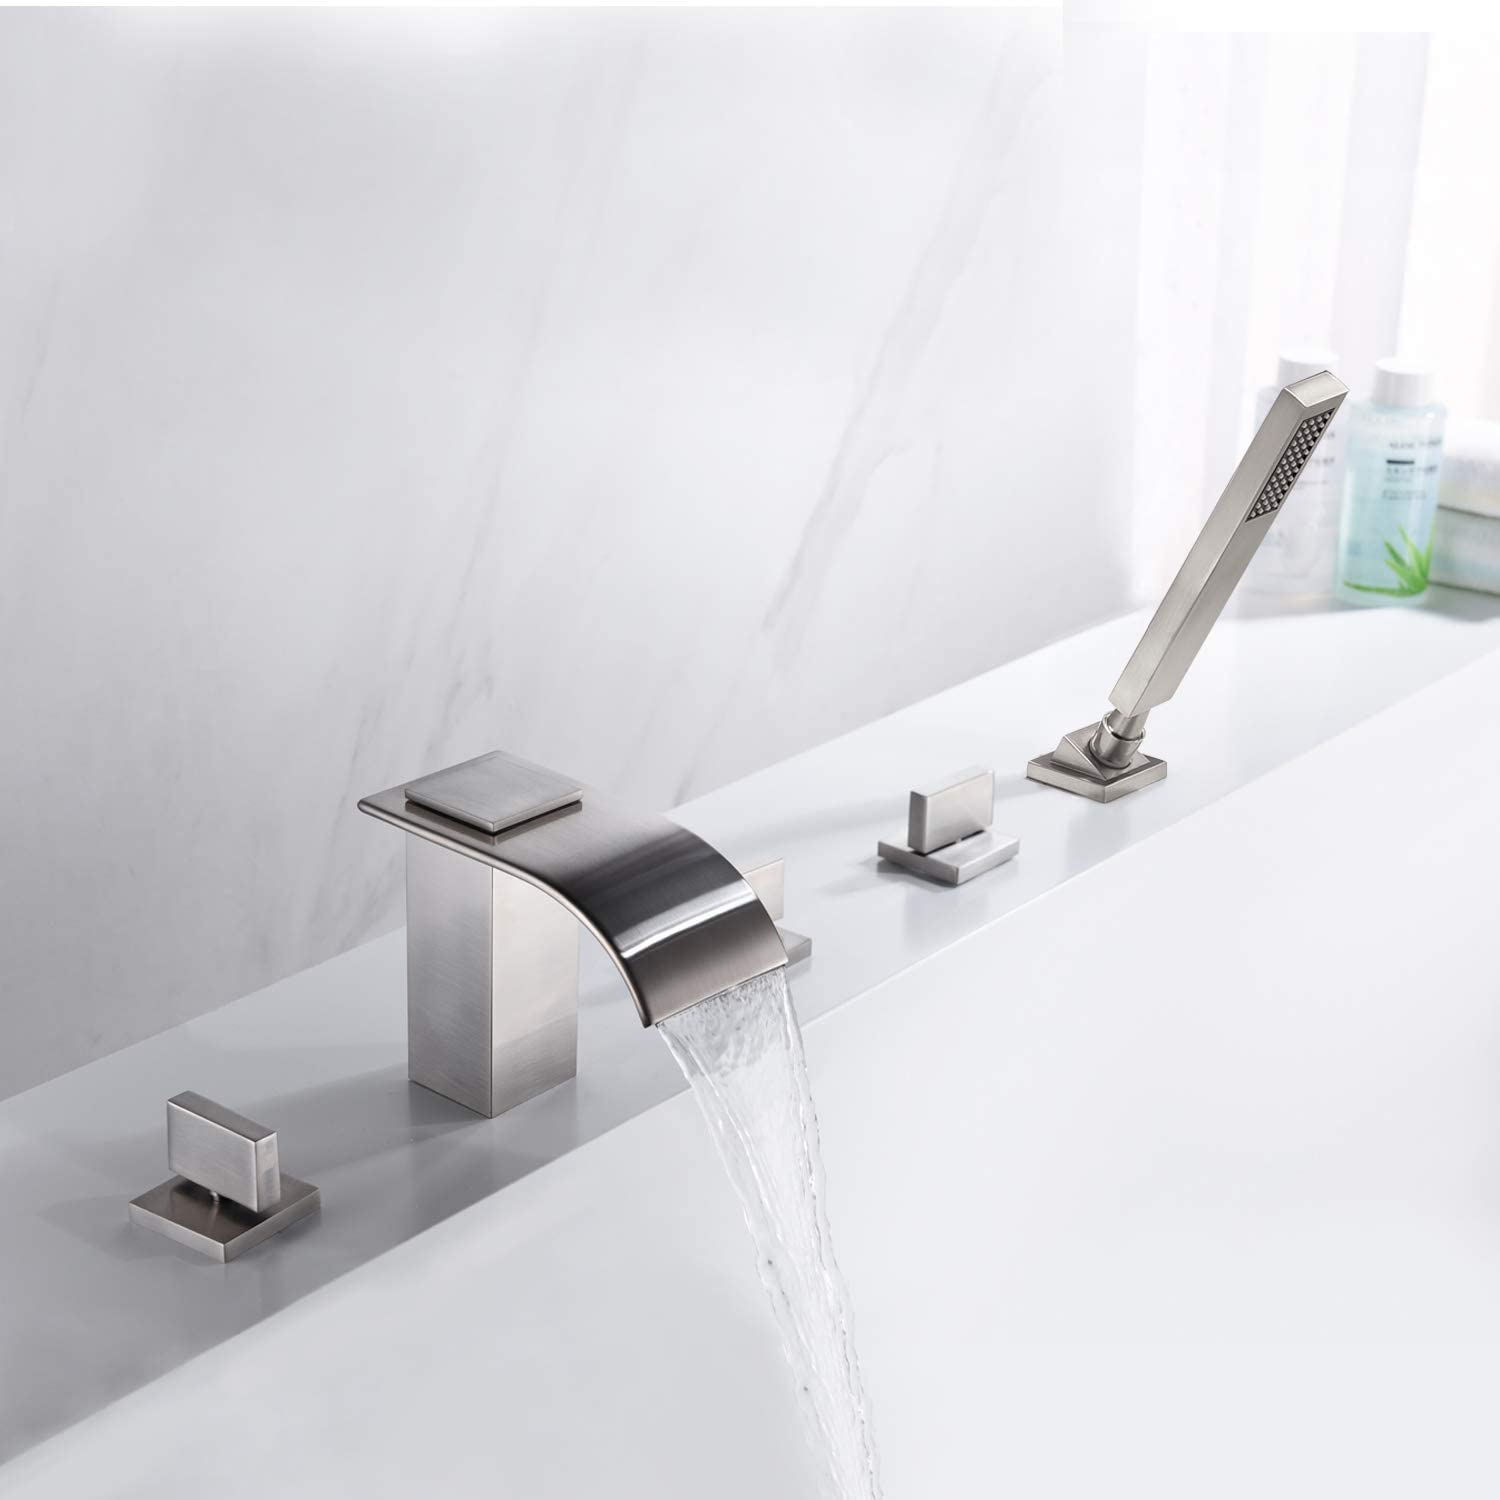 wowow brushed nickel 5 hole roman tub faucet with handheld shower